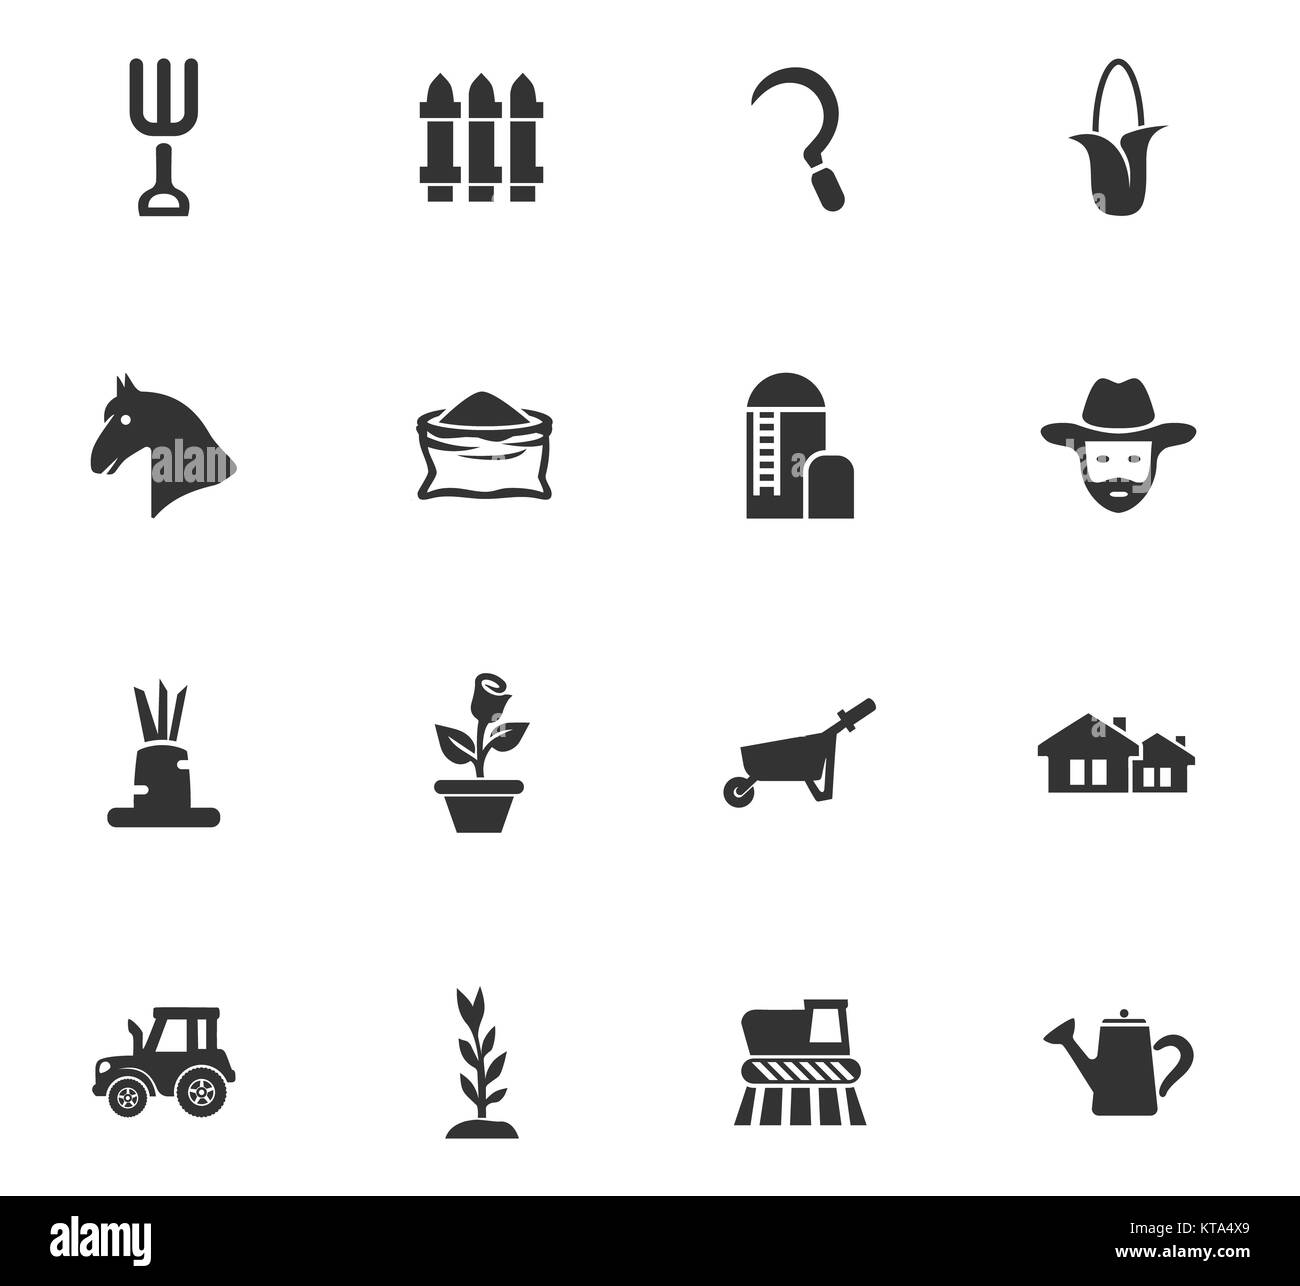 Agricultural icons set Stock Photo